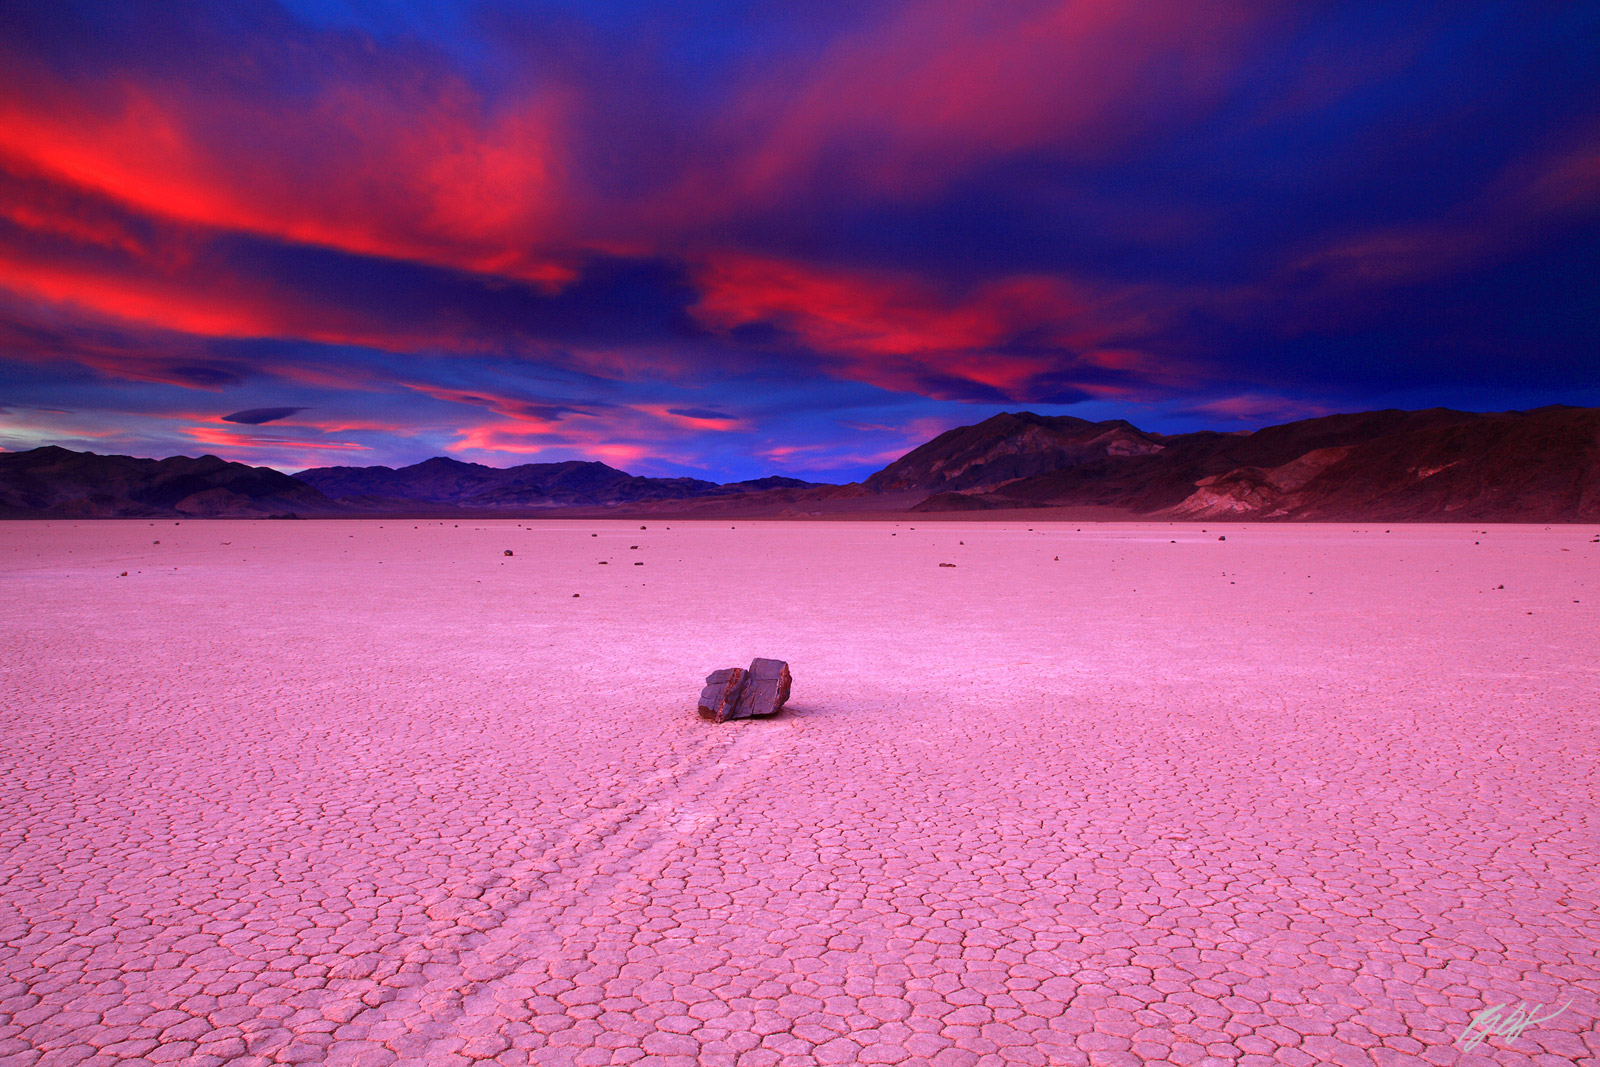 Sunset on the Racetrack in Death Valley National Park, California